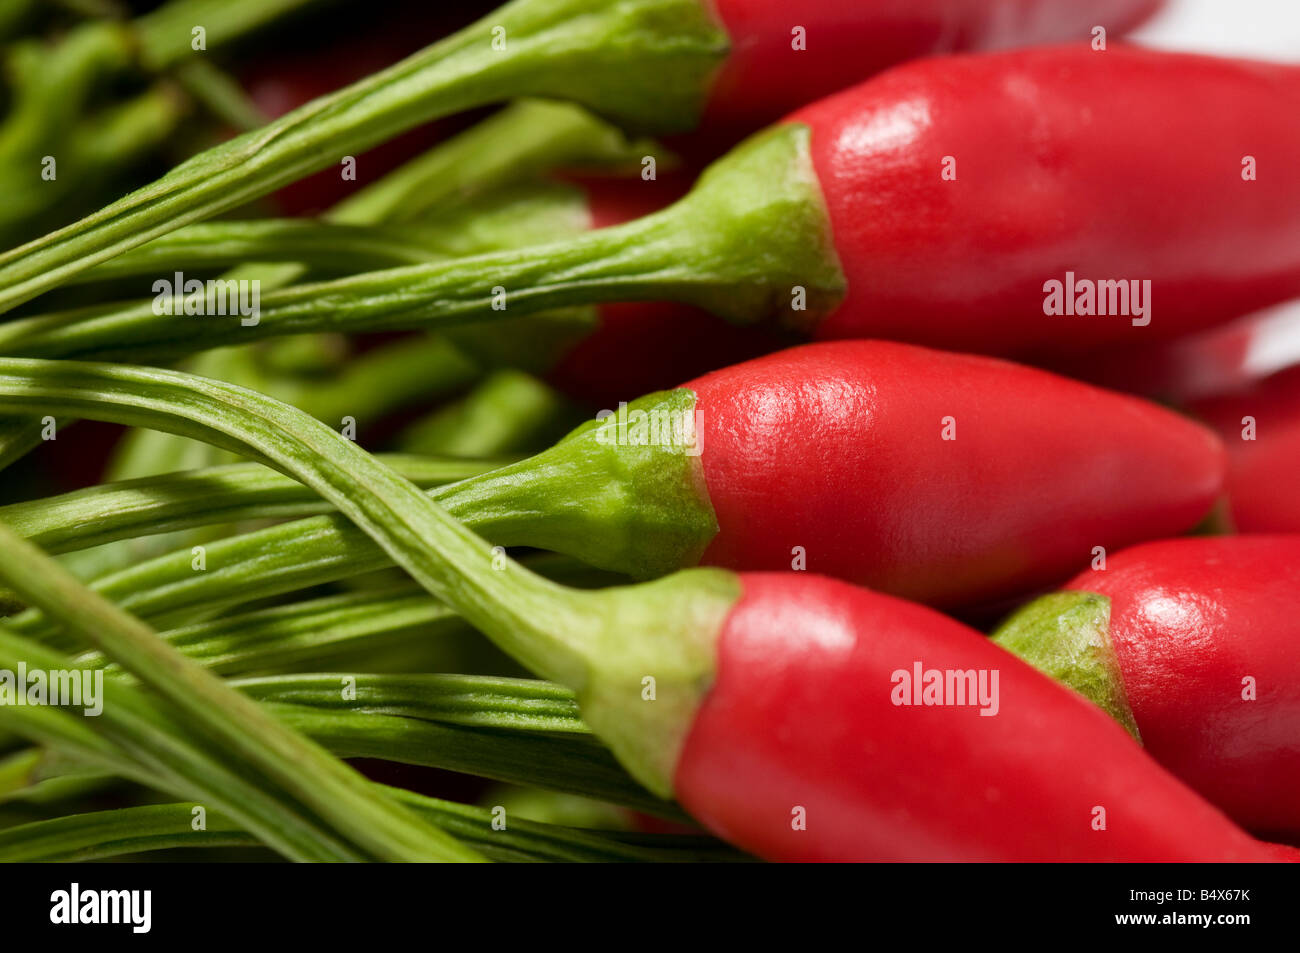 Red Hot Chili Peppers Foto Stock